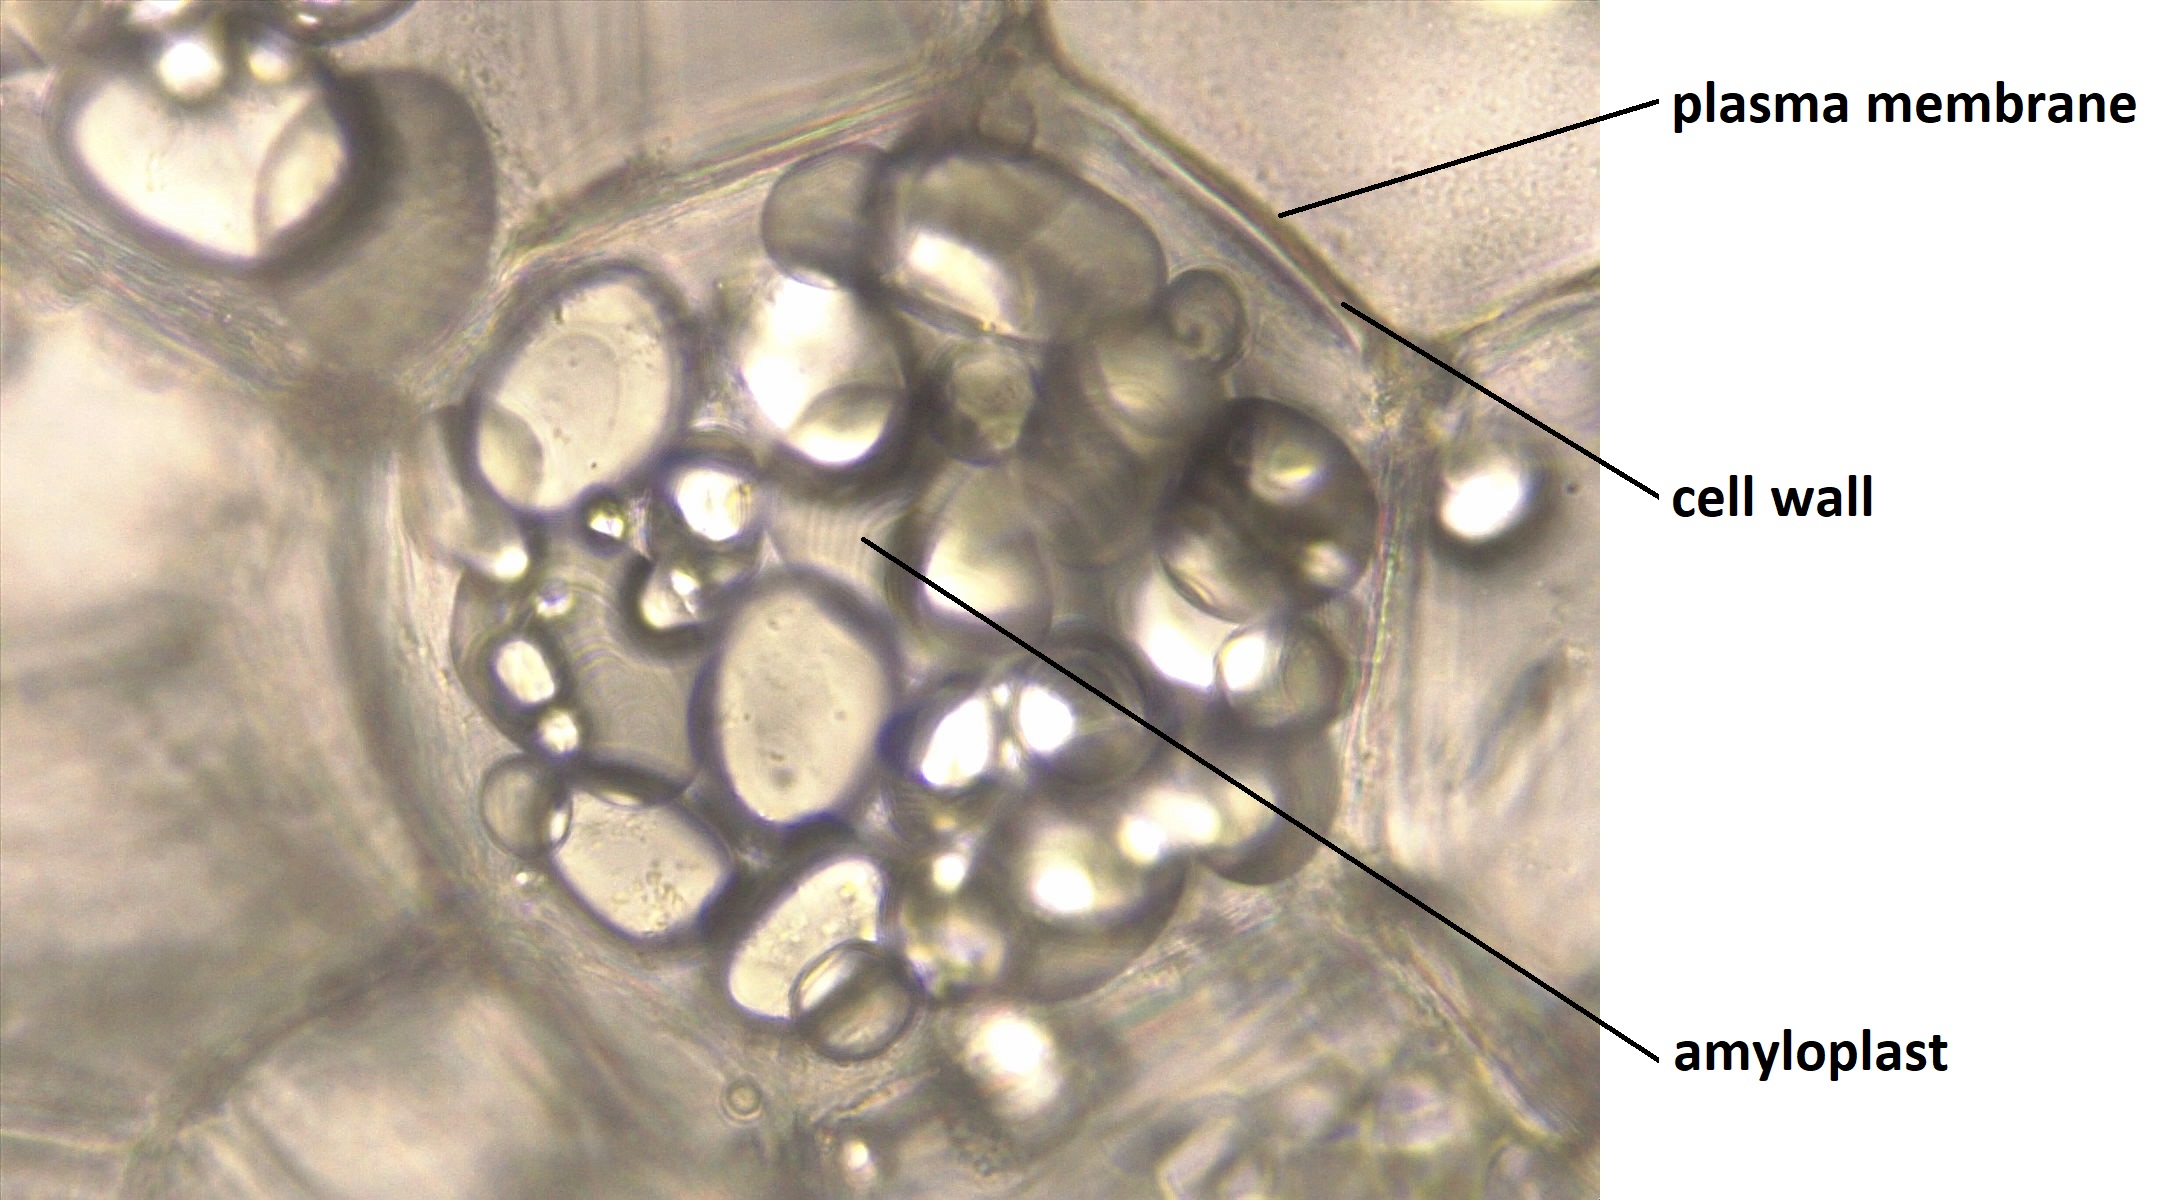 Photograph showing a plant cell containing amyloplasts. The phot shows a isodiametric, polygonal cell with circular to oval starch bodies in it.